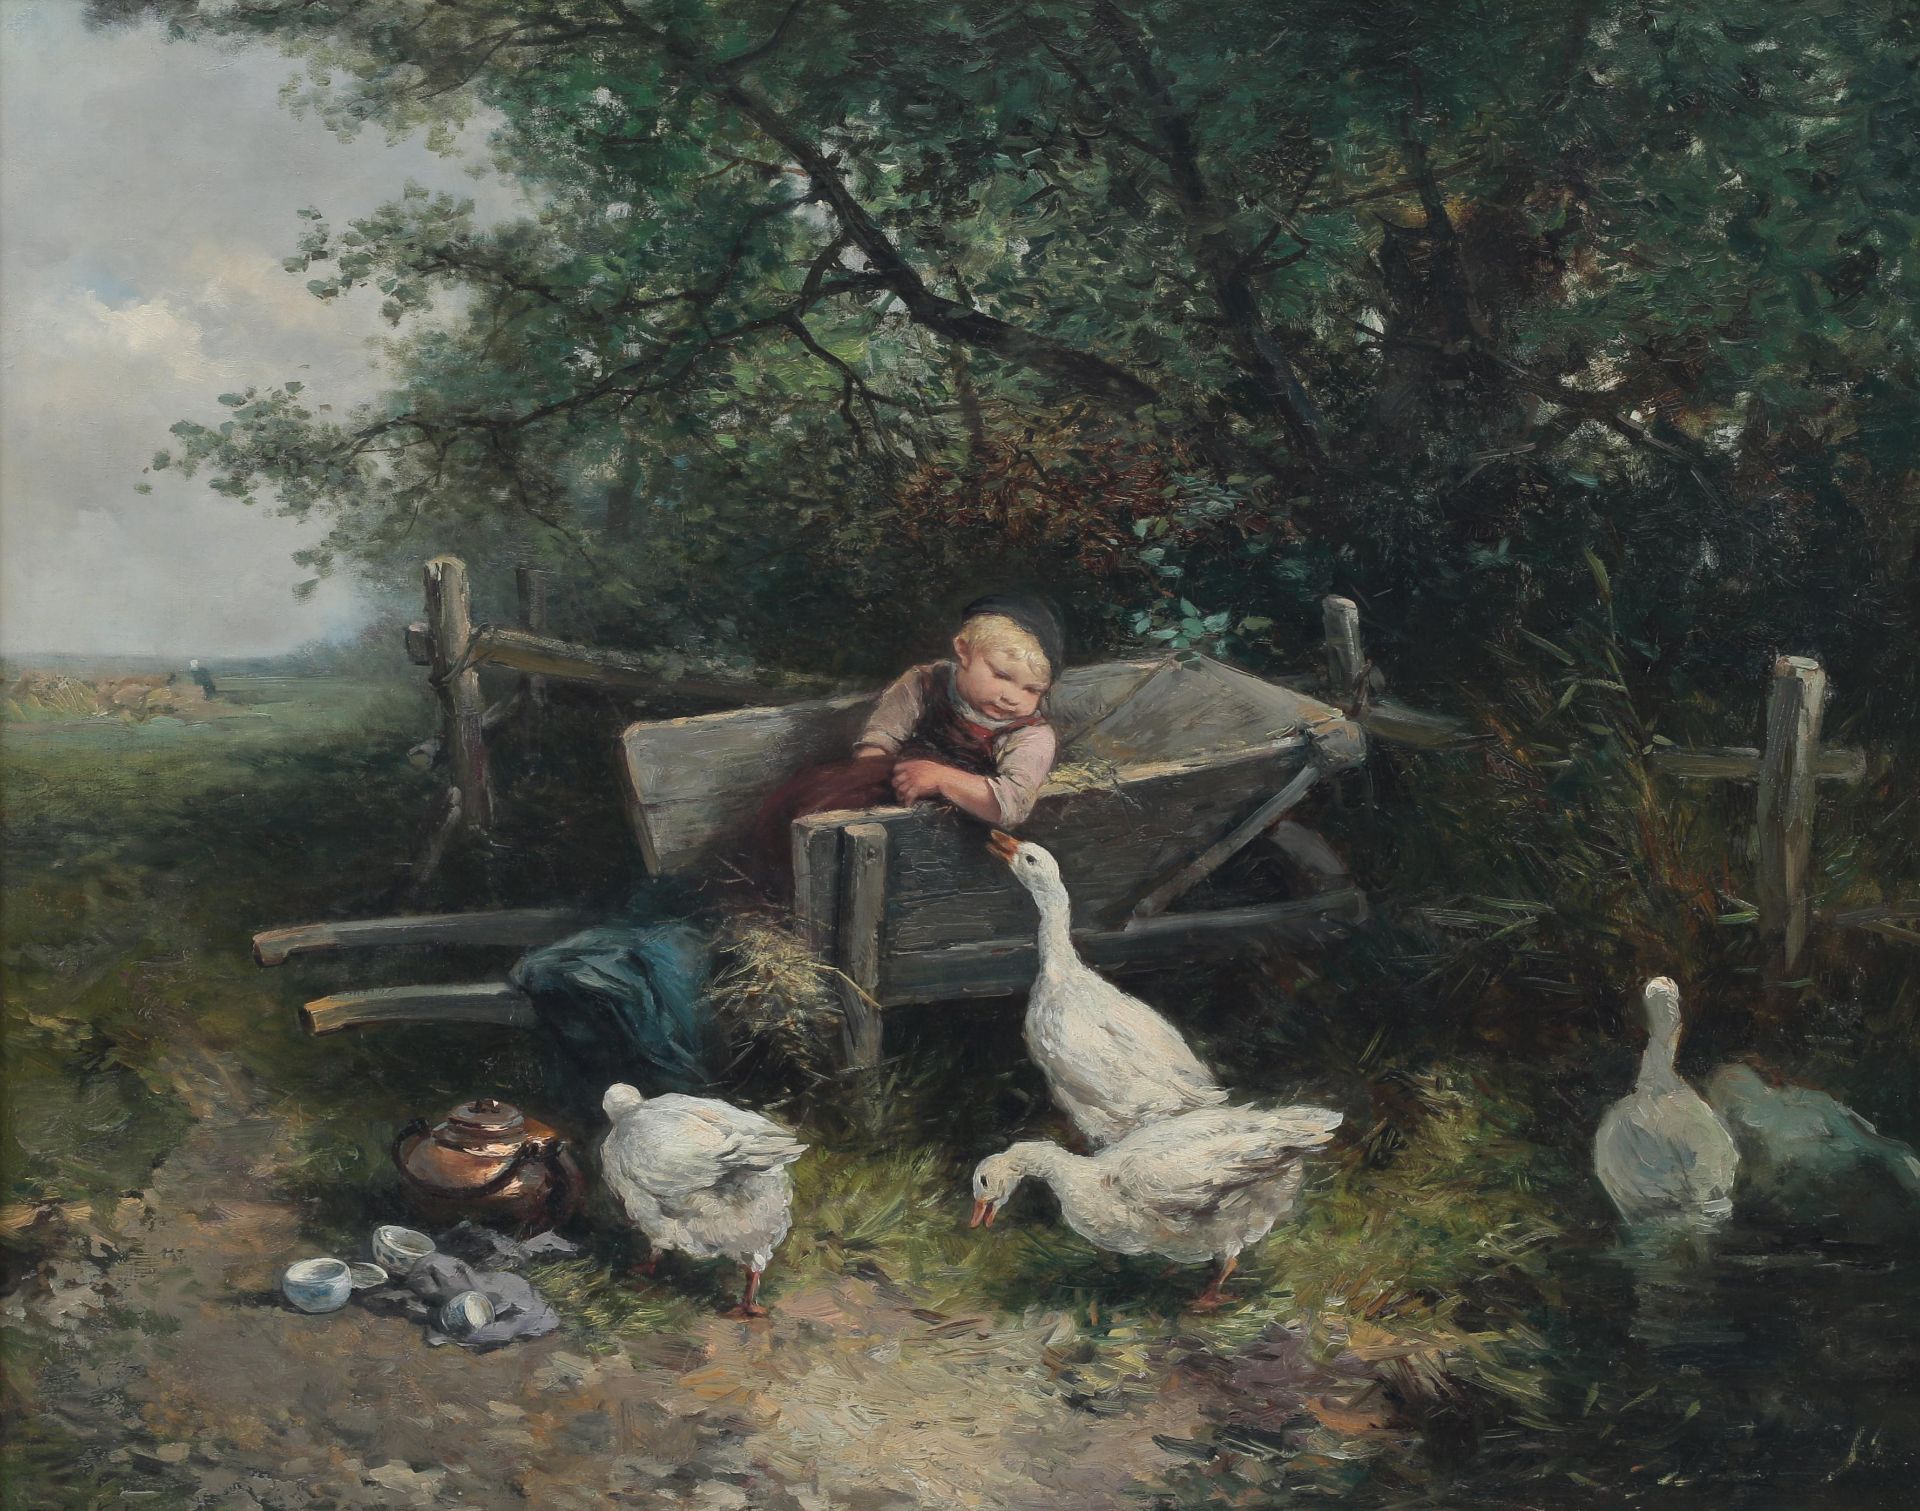 Mari ten Kate (1831-1910) Watching the geese. Signed lower left. Provenance: Sotheby's Amsterdam, 23